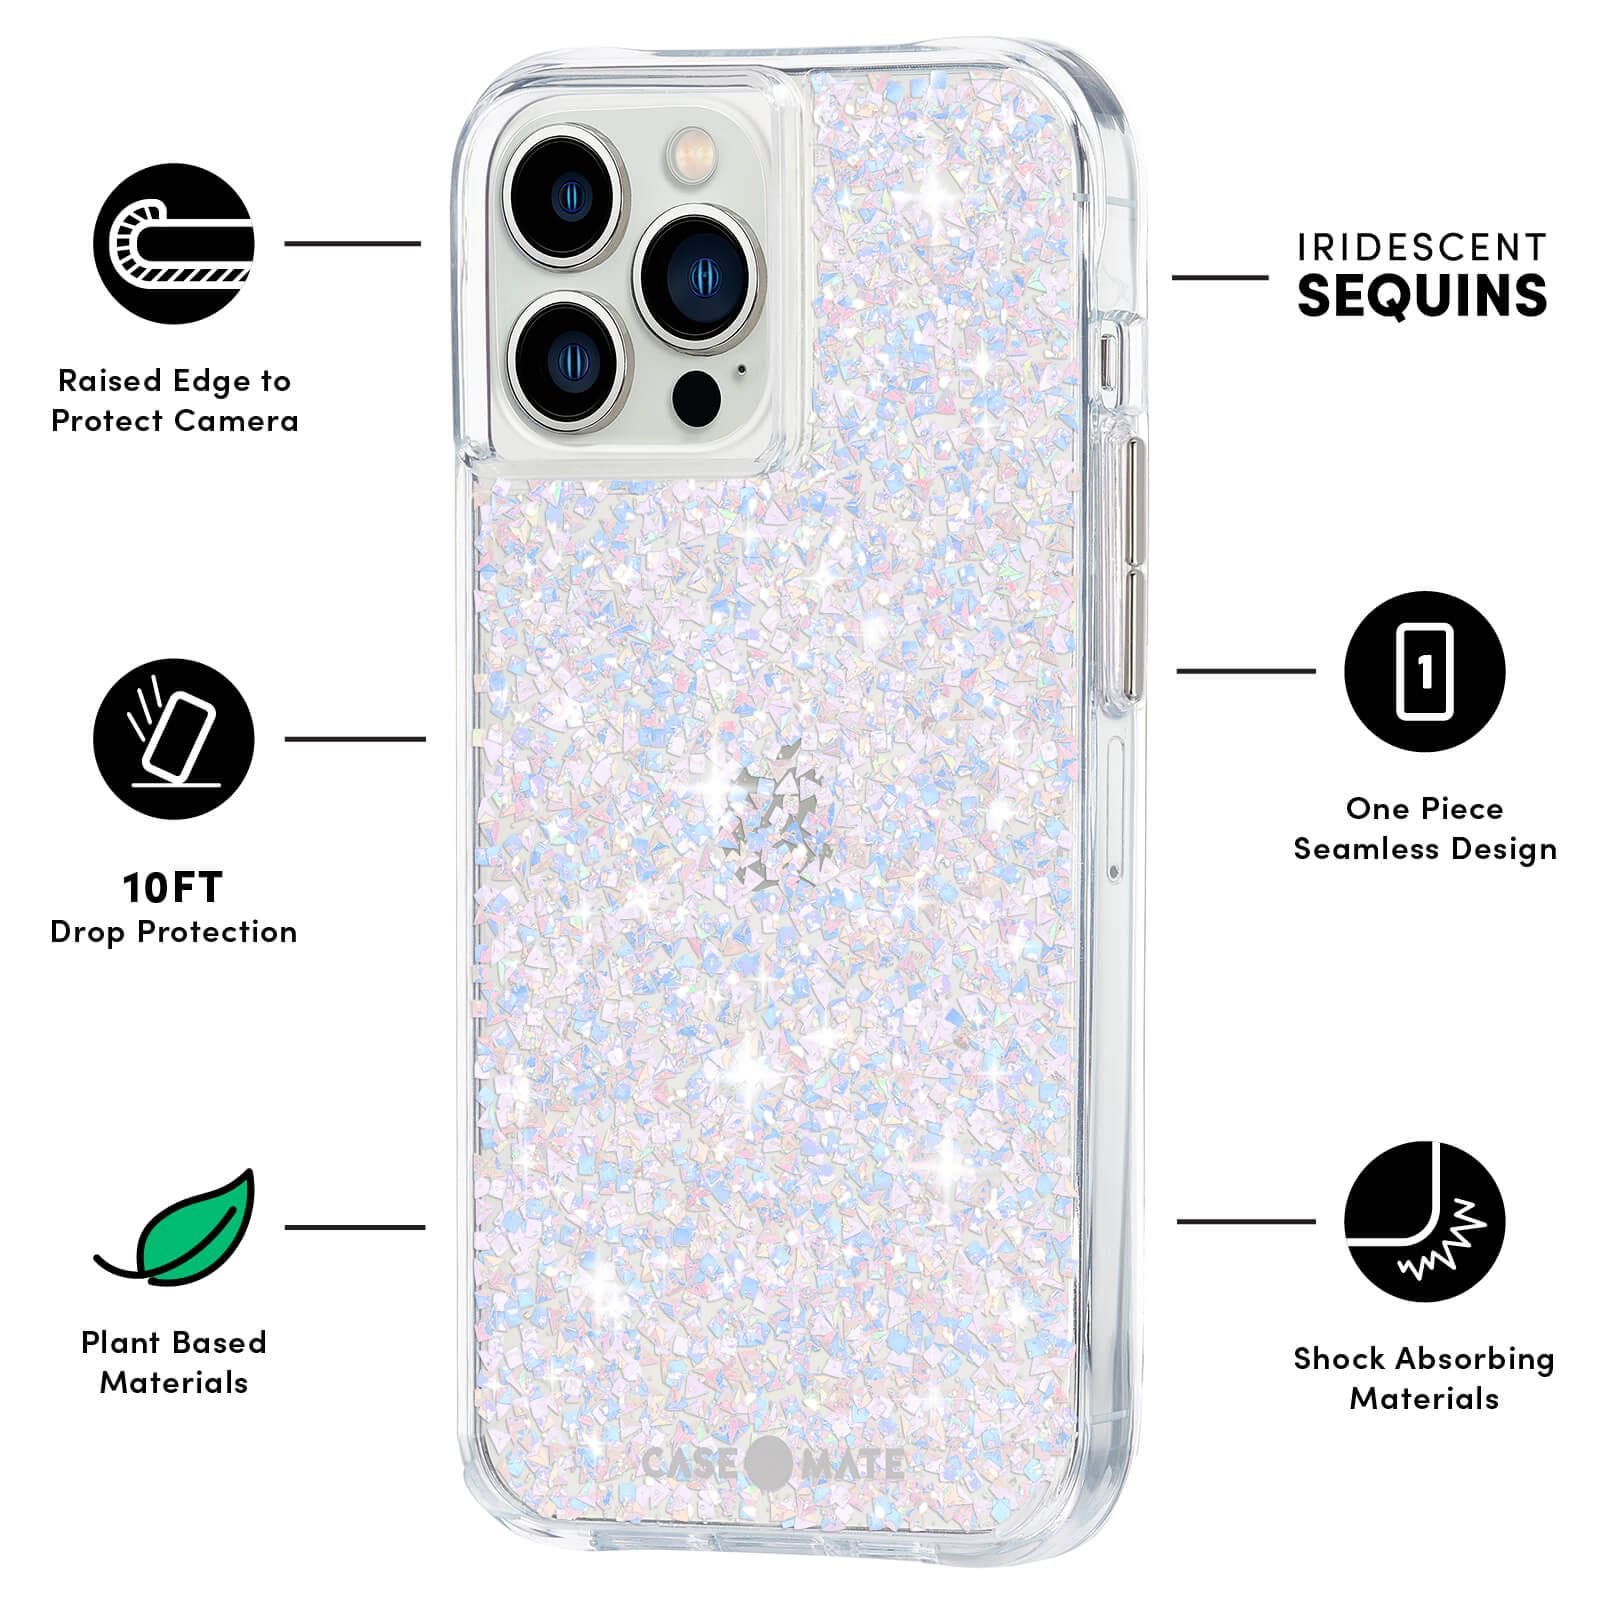 Features: raised edge to protect camera, 10 ft drop protection, plant based materials, iridescent sequins, one piece seamless design, shock absorbing materials. color::Twinkle Diamond